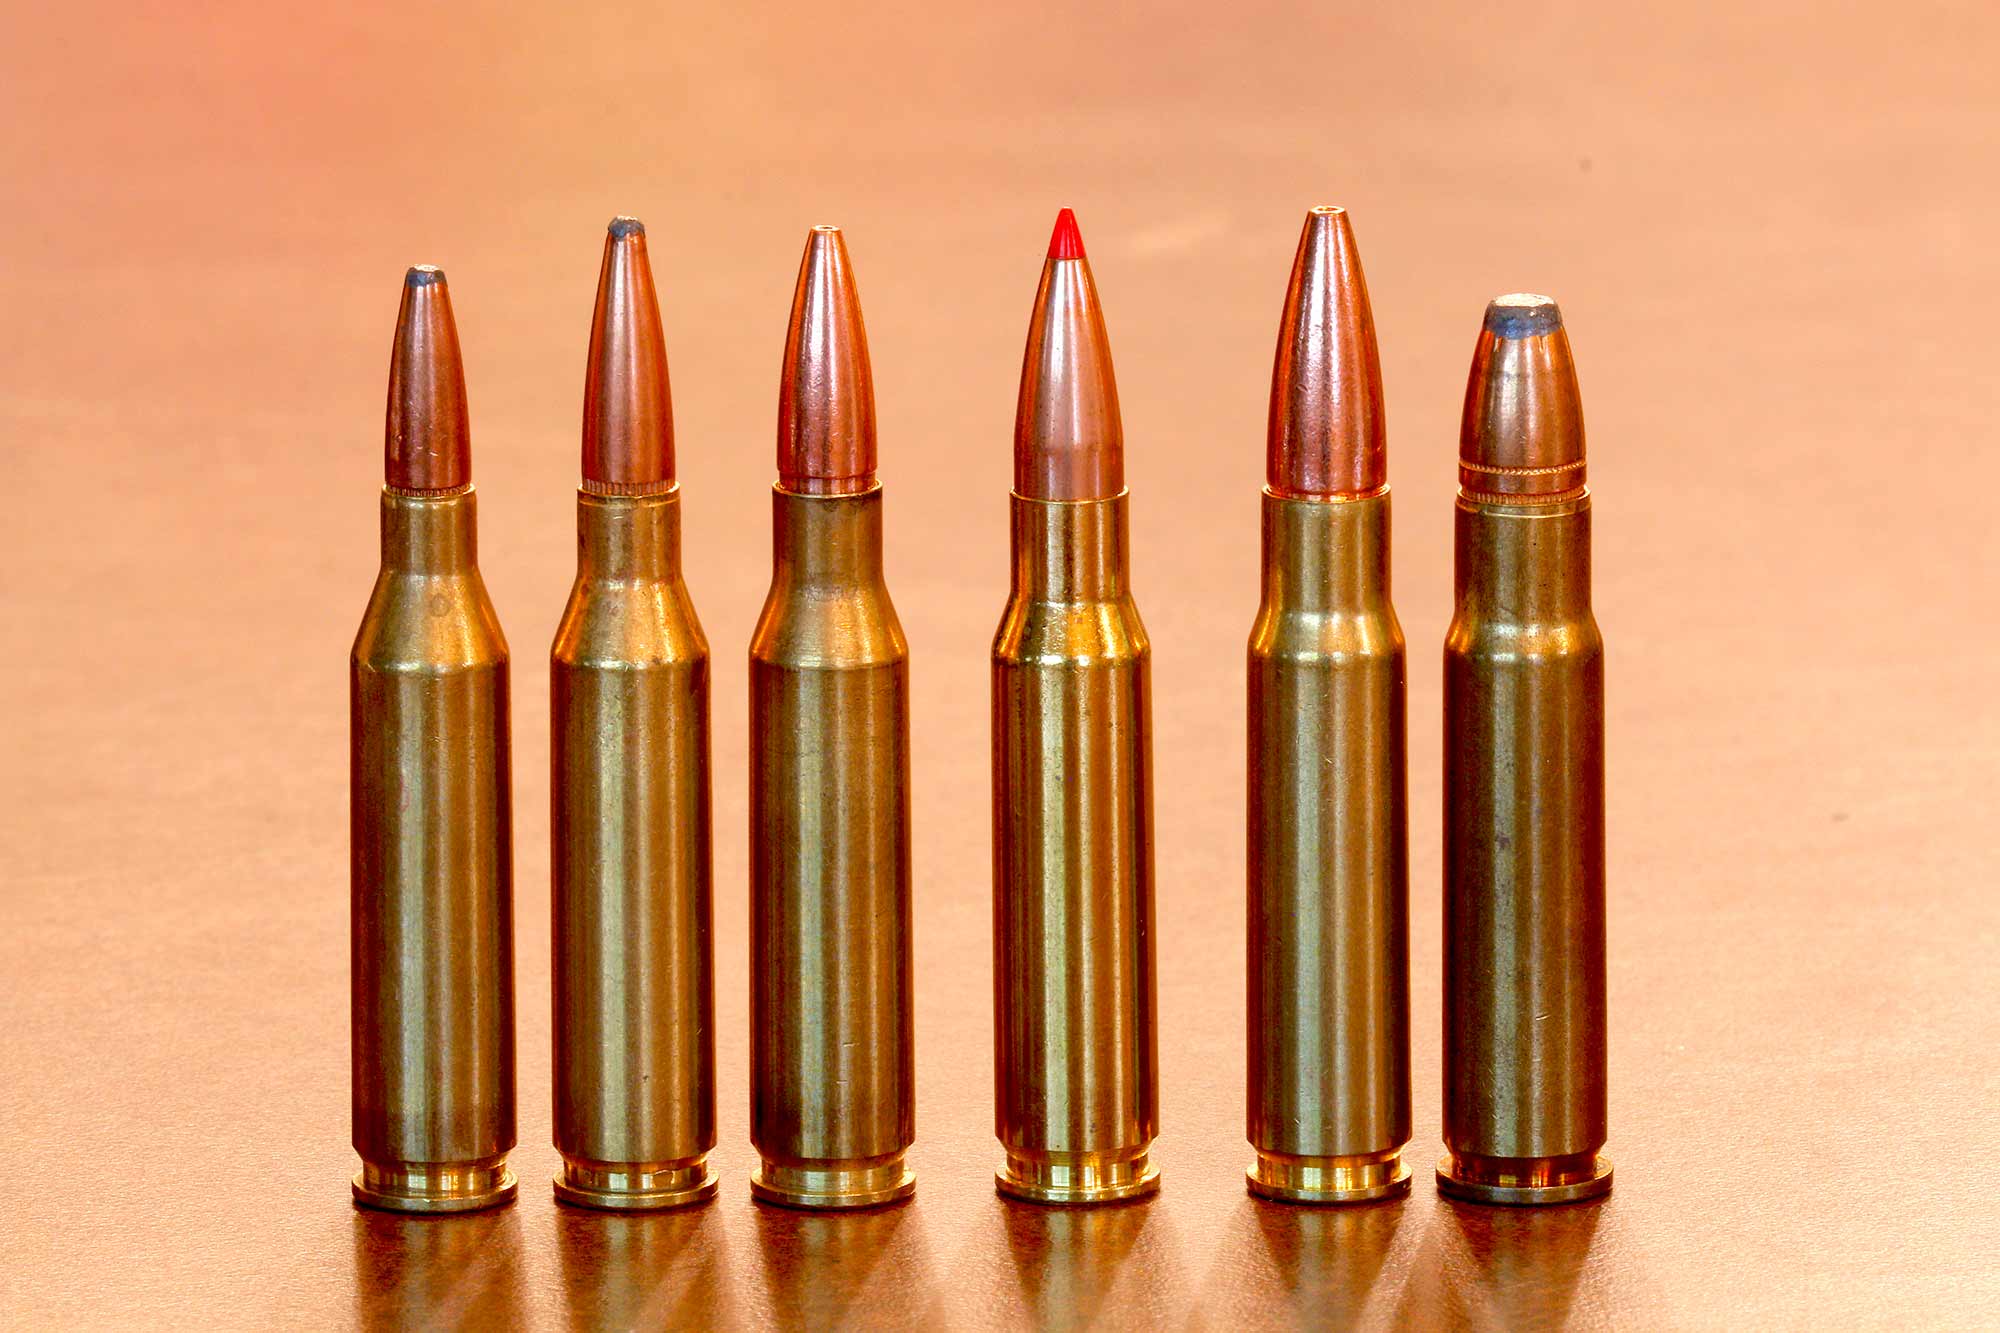 The .308 family of cartridges